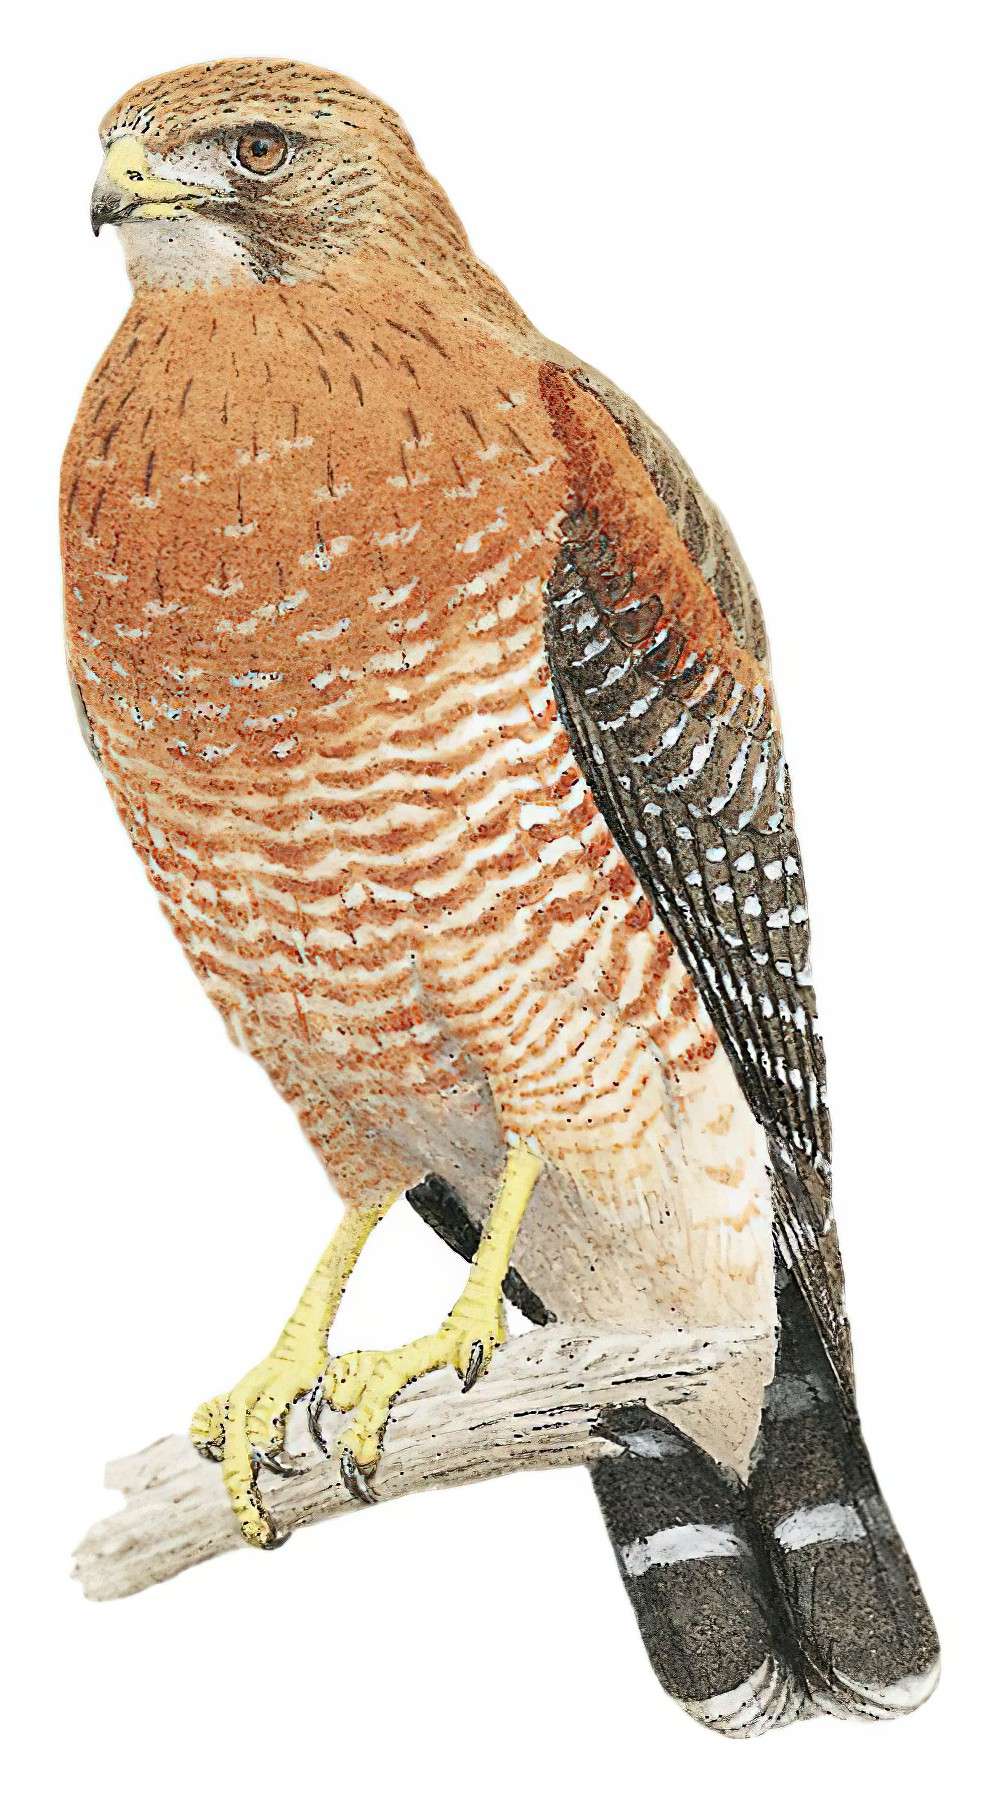 Red-shouldered Hawk / Buteo lineatus